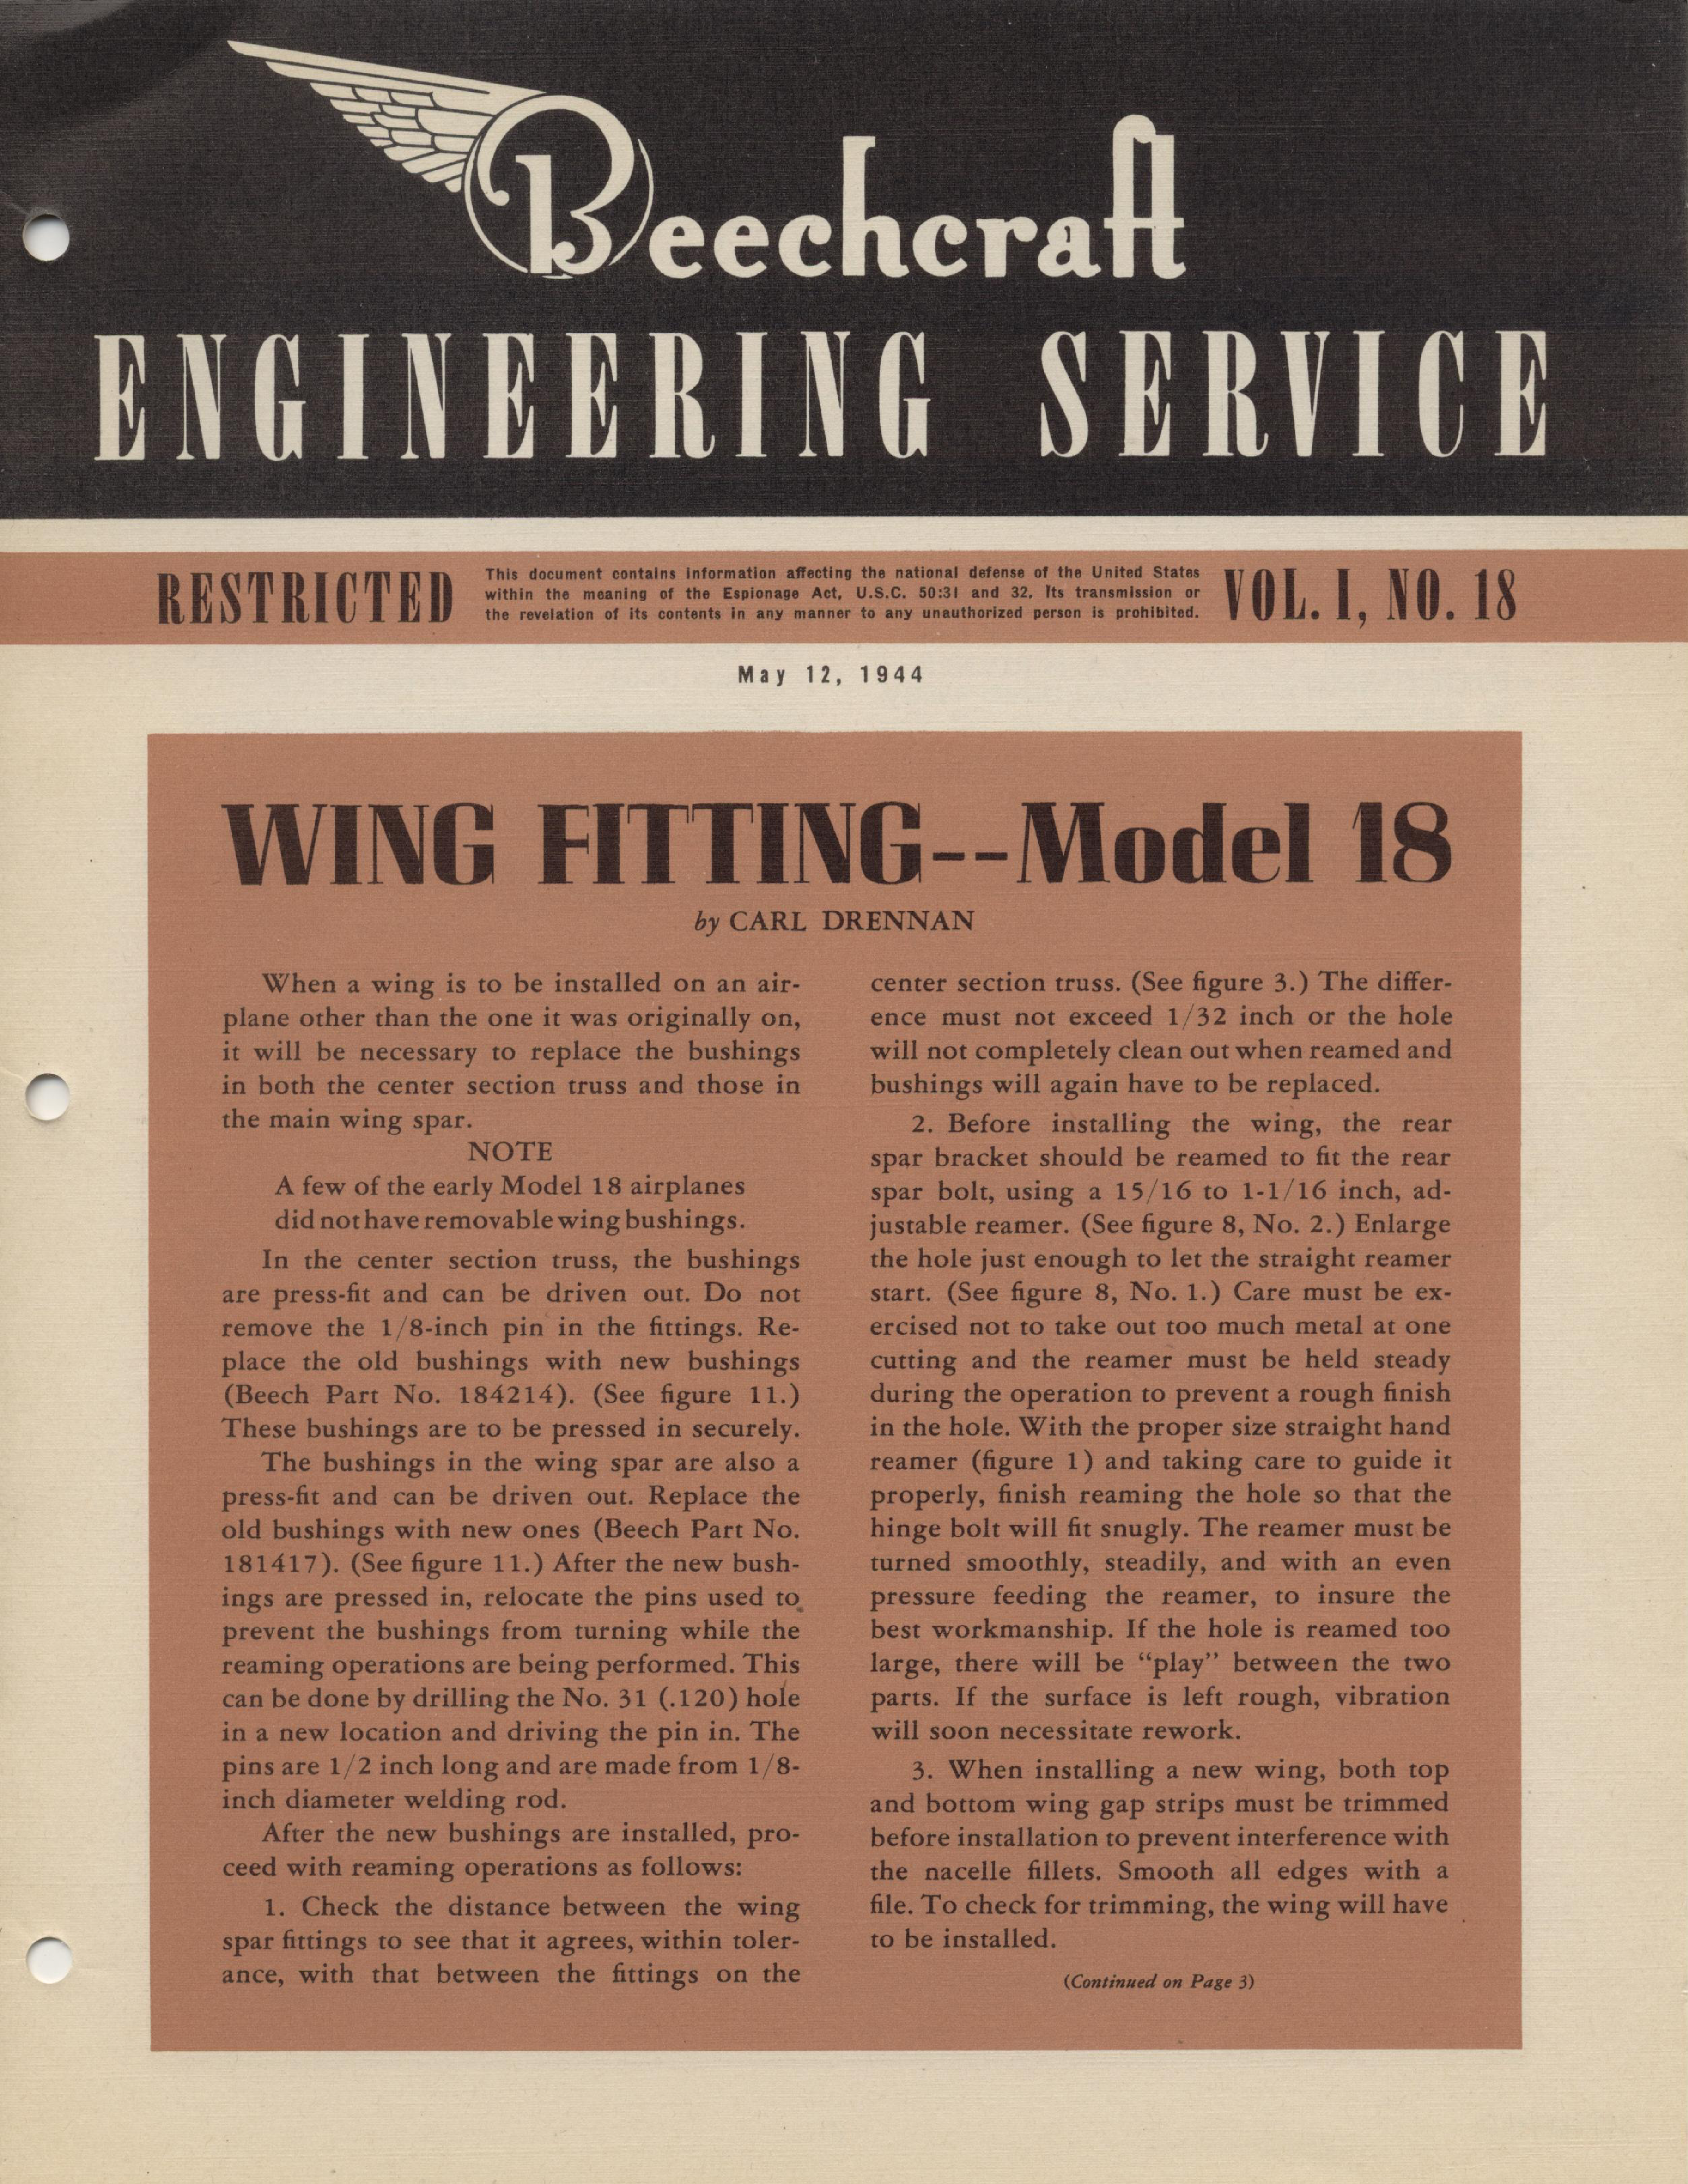 Sample page 1 from AirCorps Library document: Vol. I, No. 18 - Beechcraft Engineering Service